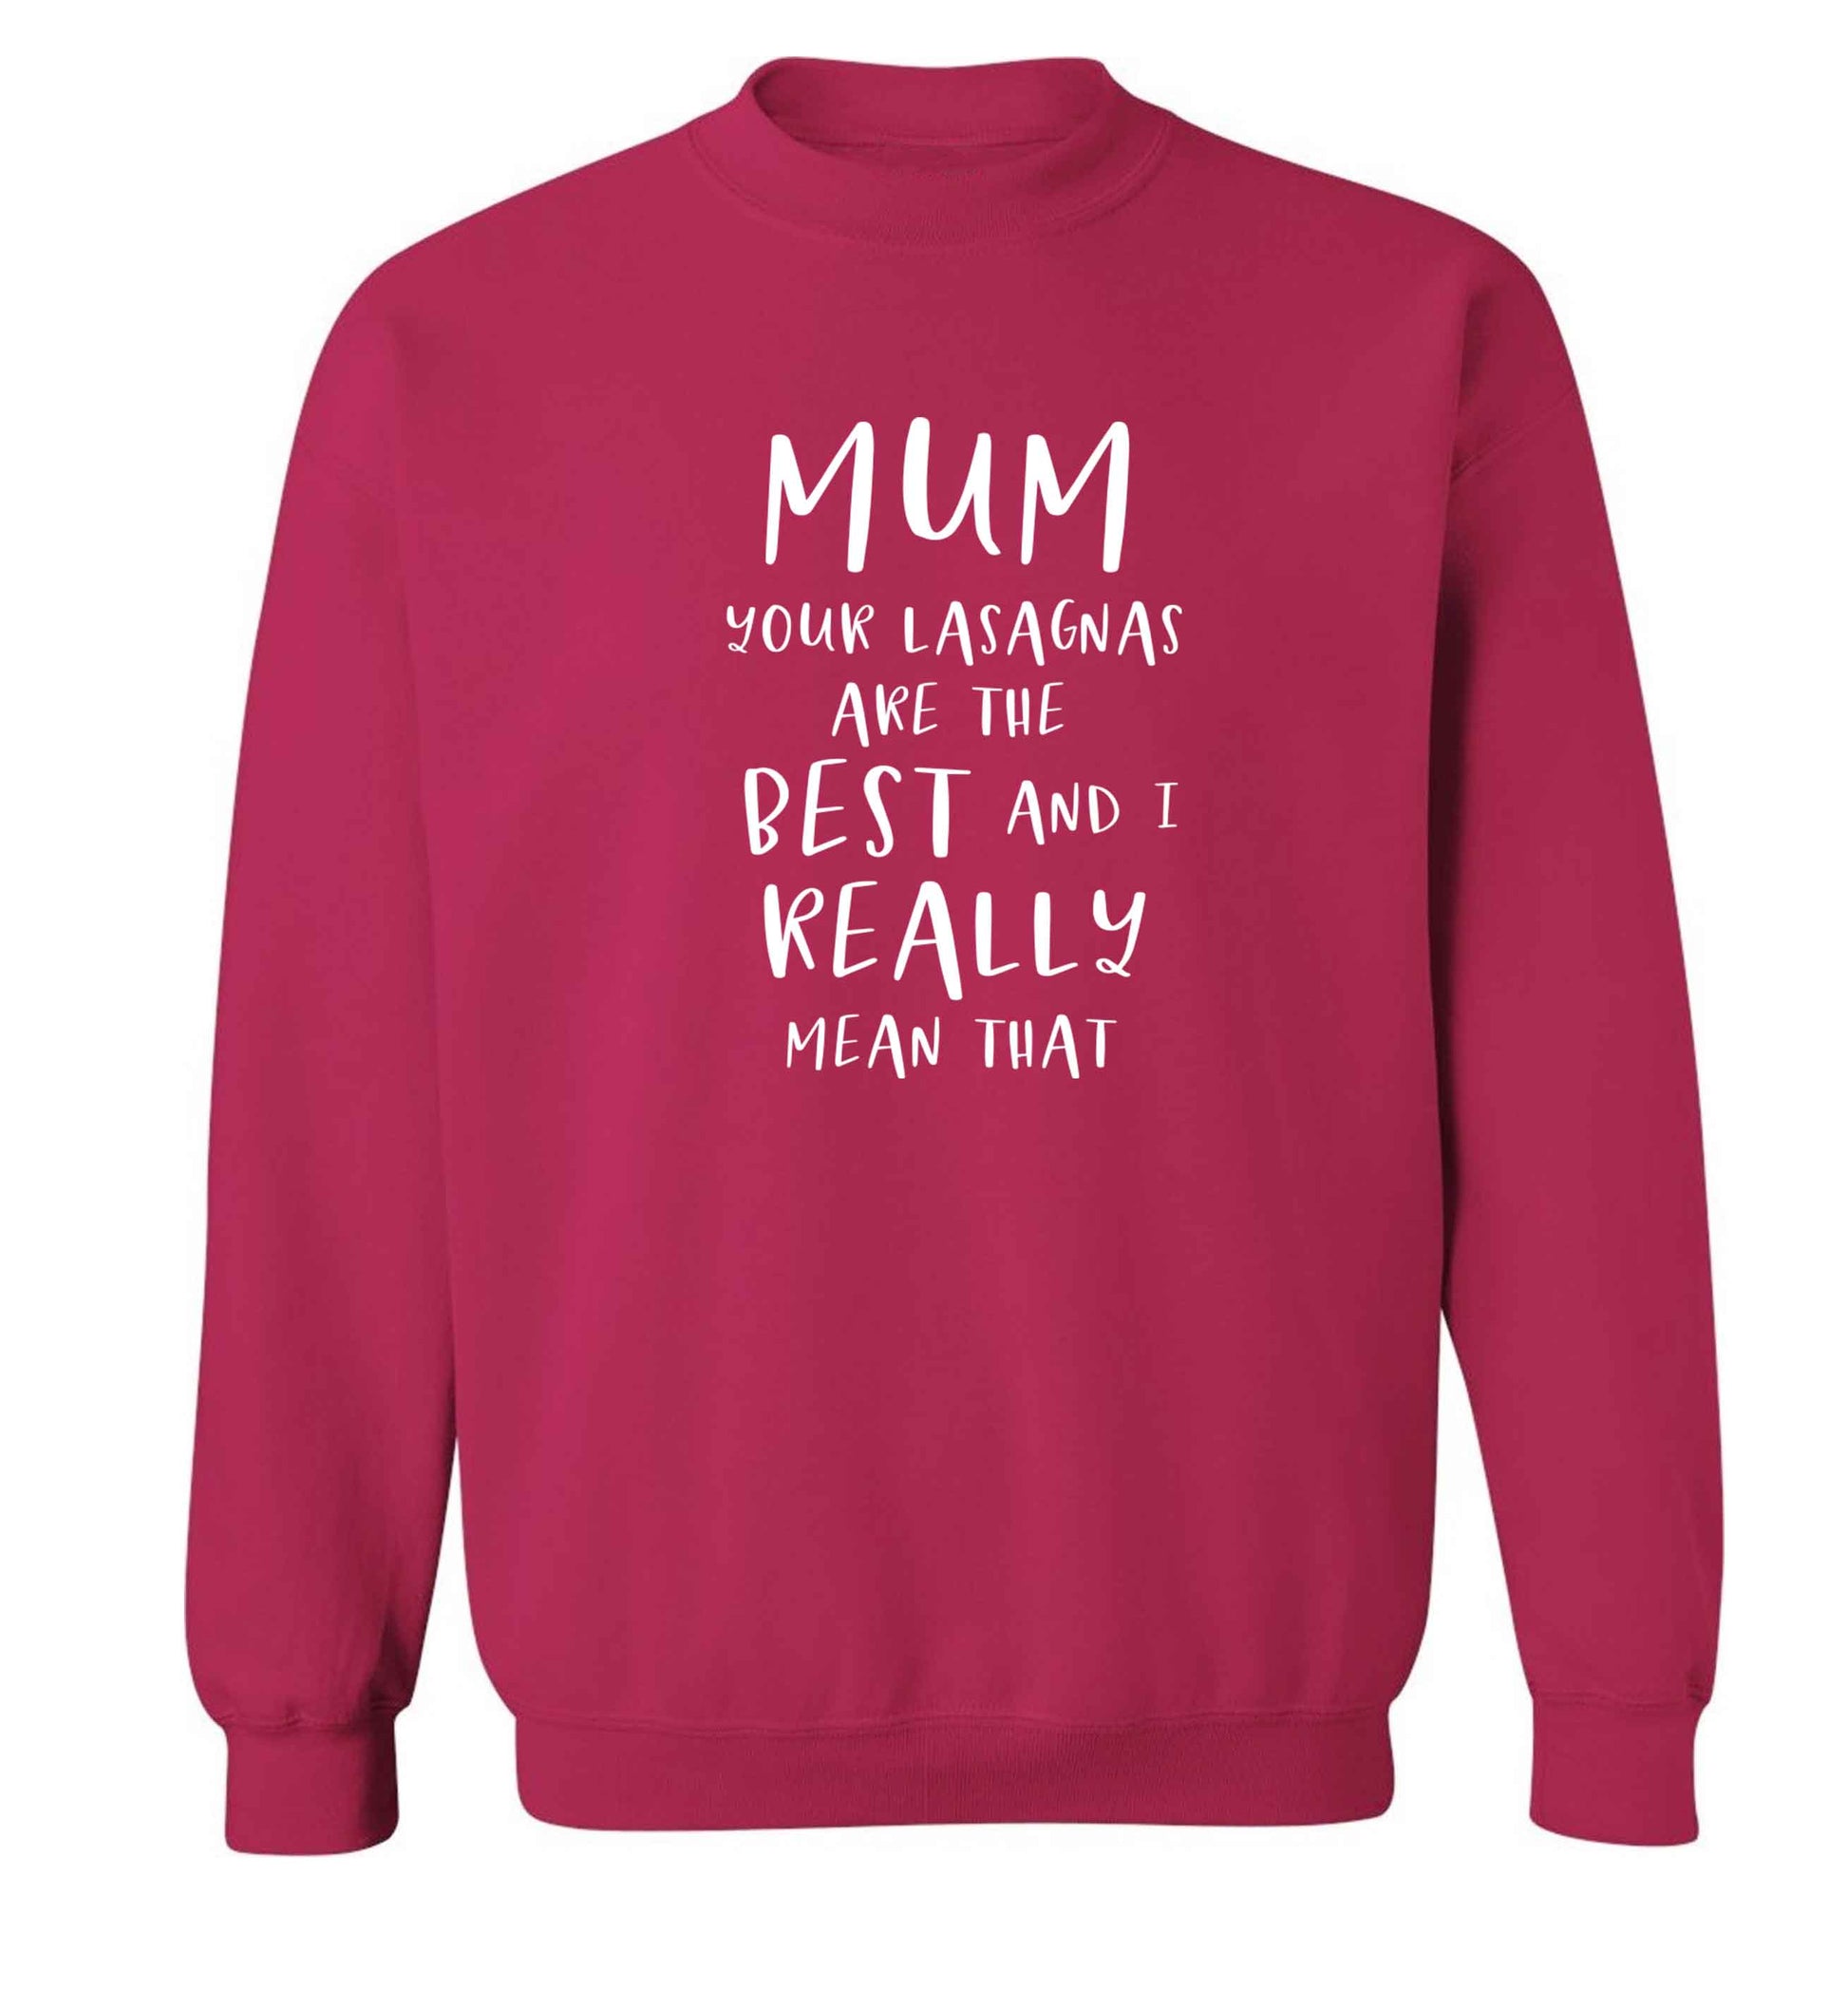 Funny gifts for your mum on mother's dayor her birthday! Mum your lasagnas are the best and I really mean that adult's unisex pink sweater 2XL